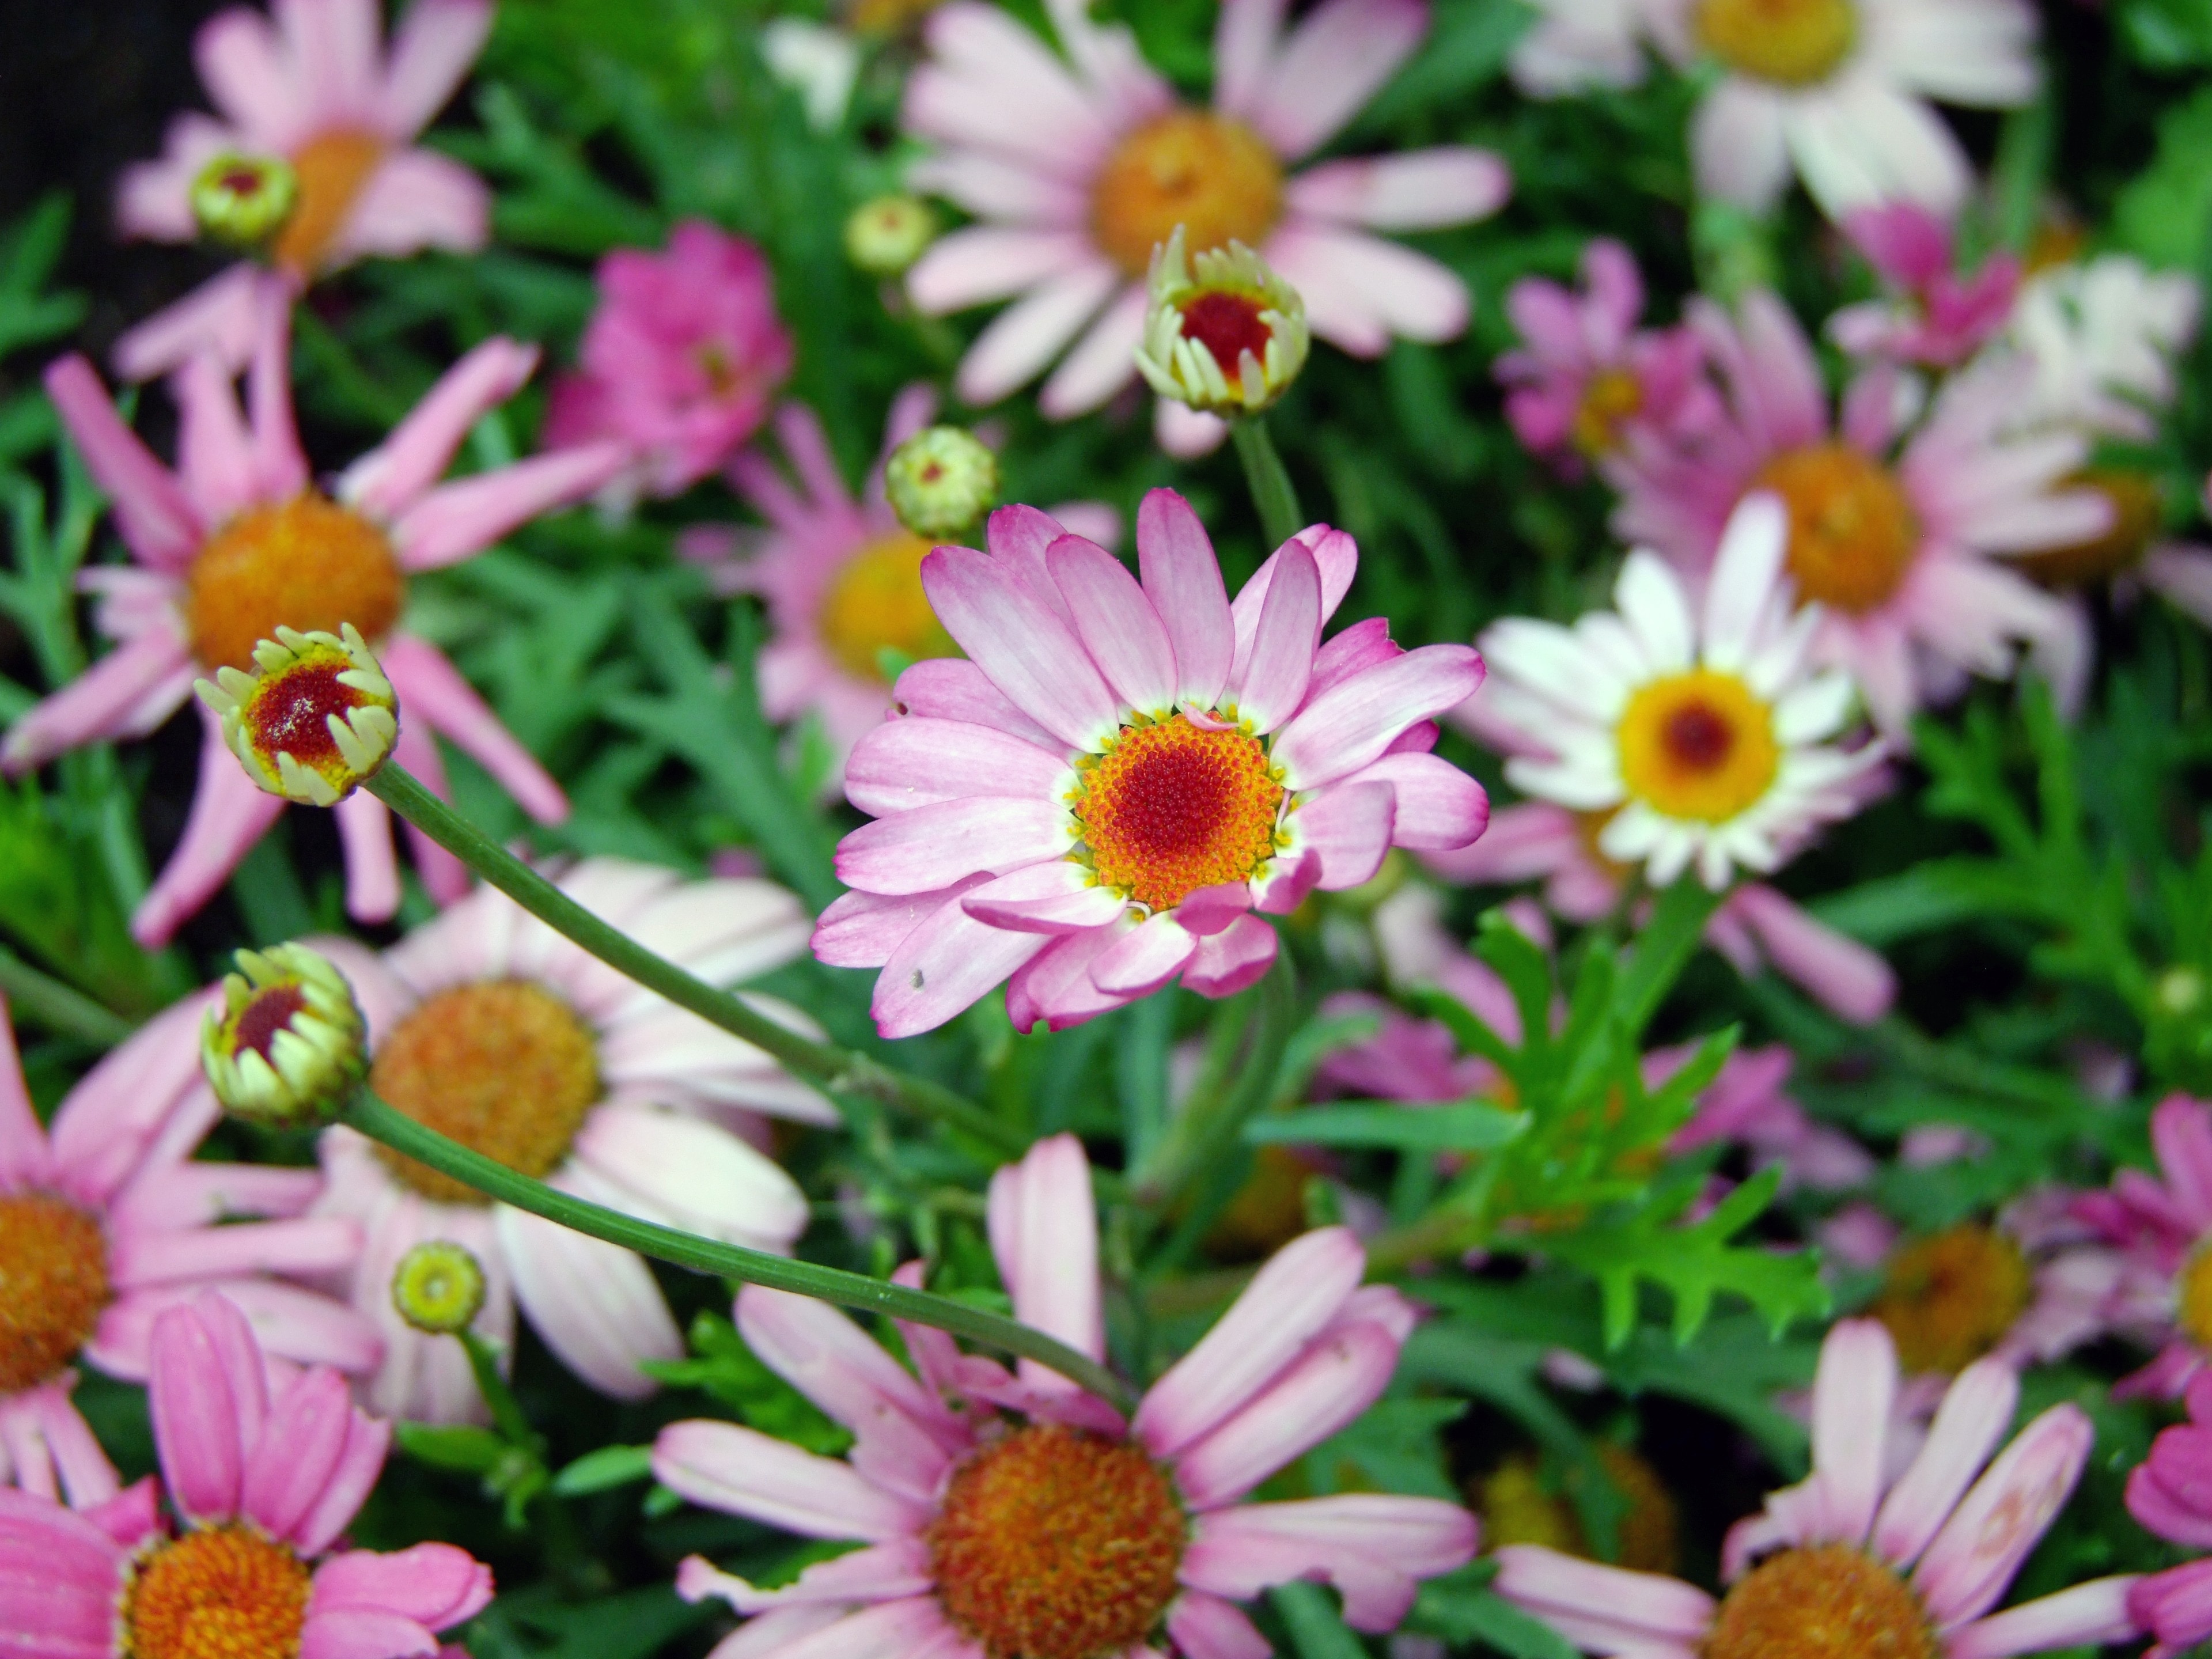 Nature, Flowers, Pink Daisy, flower, growth